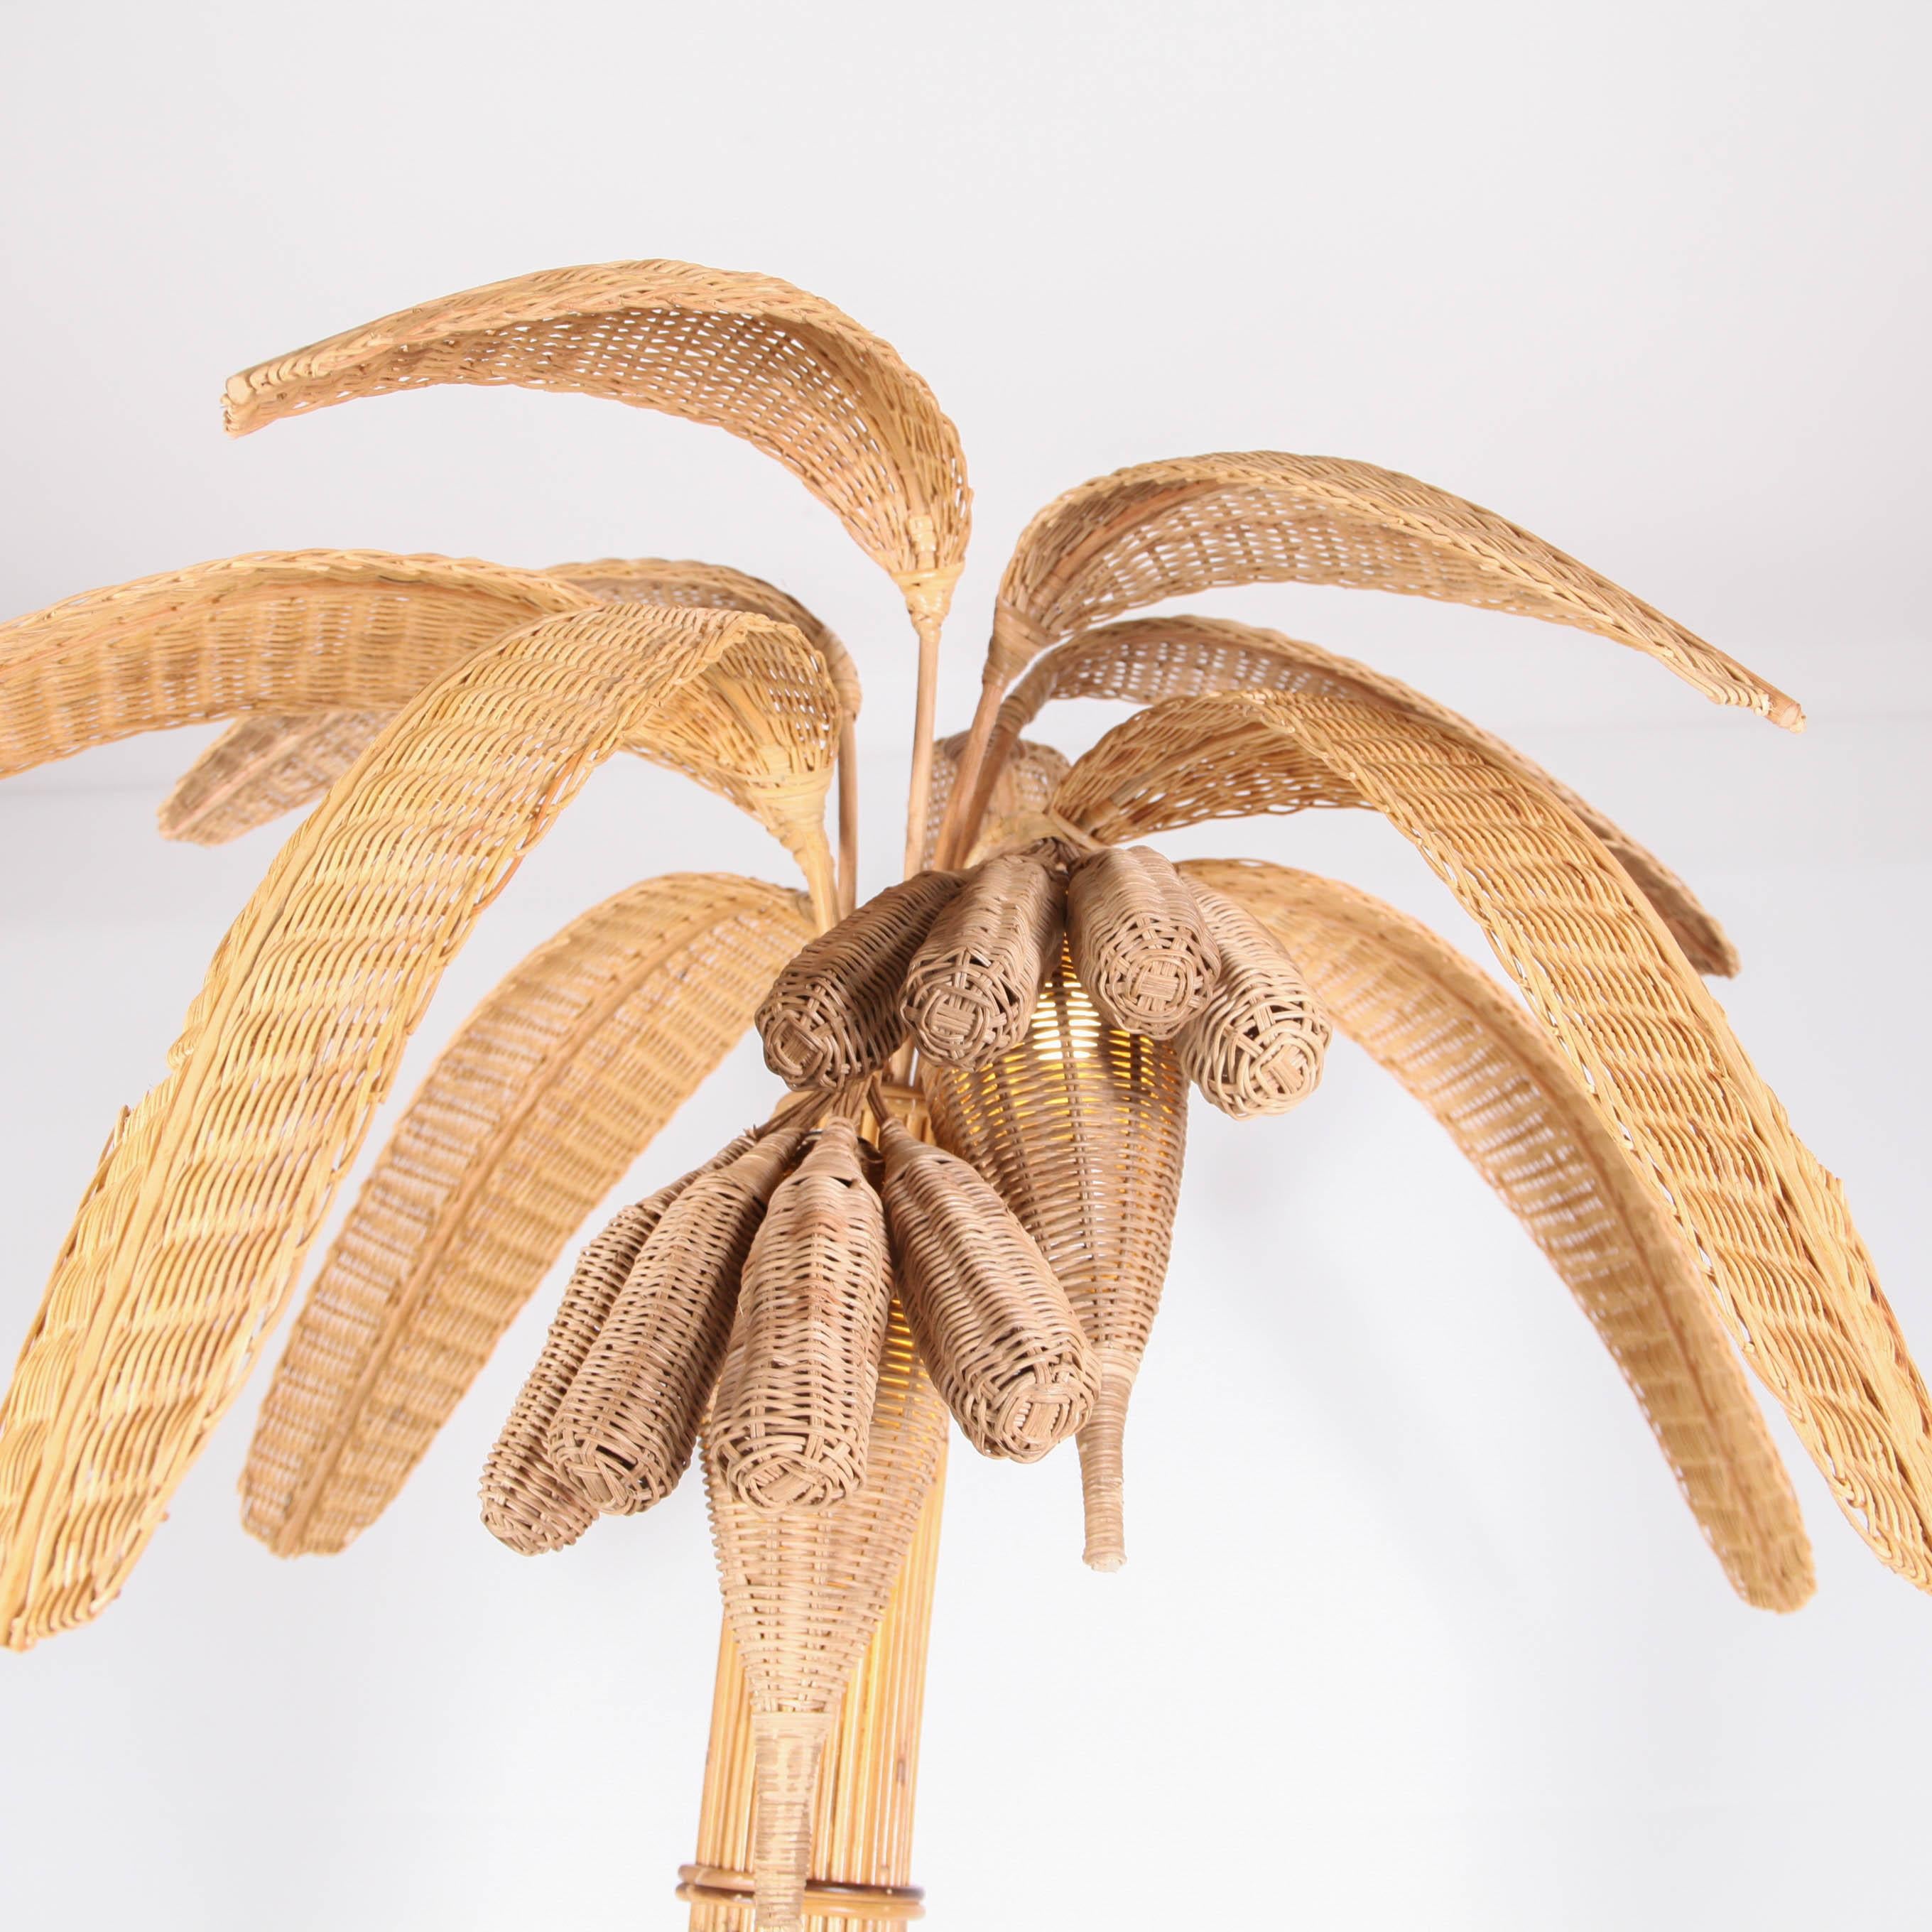 Beautiful handmade banana tree floor lamp in natural rattan with 2 lights (in each flower).
This is a very unique lamp. It gives a nice soft light and something special wherever you place it. High quality of craftsmanship, entirely hand made.